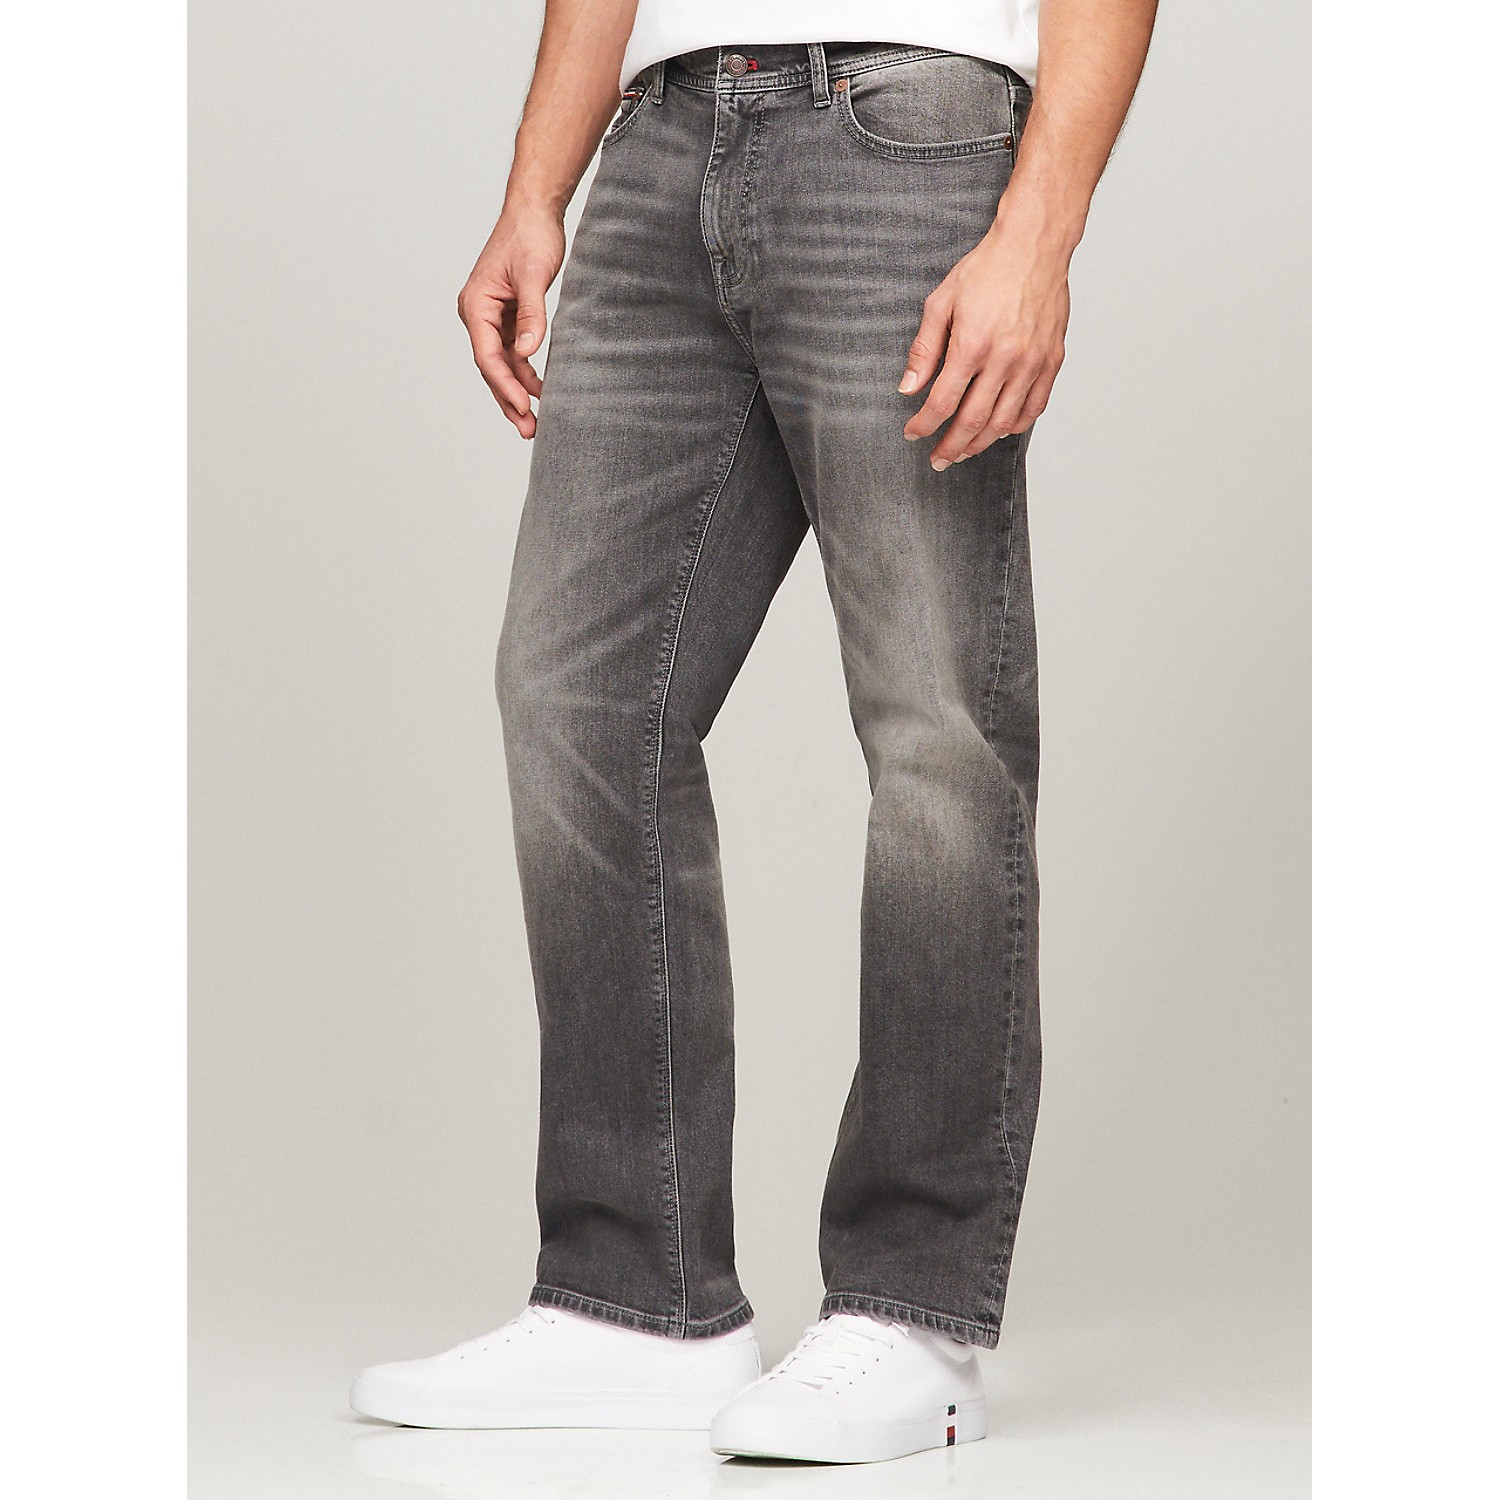 TOMMY HILFIGER Relaxed Straight Fit Gray Jean